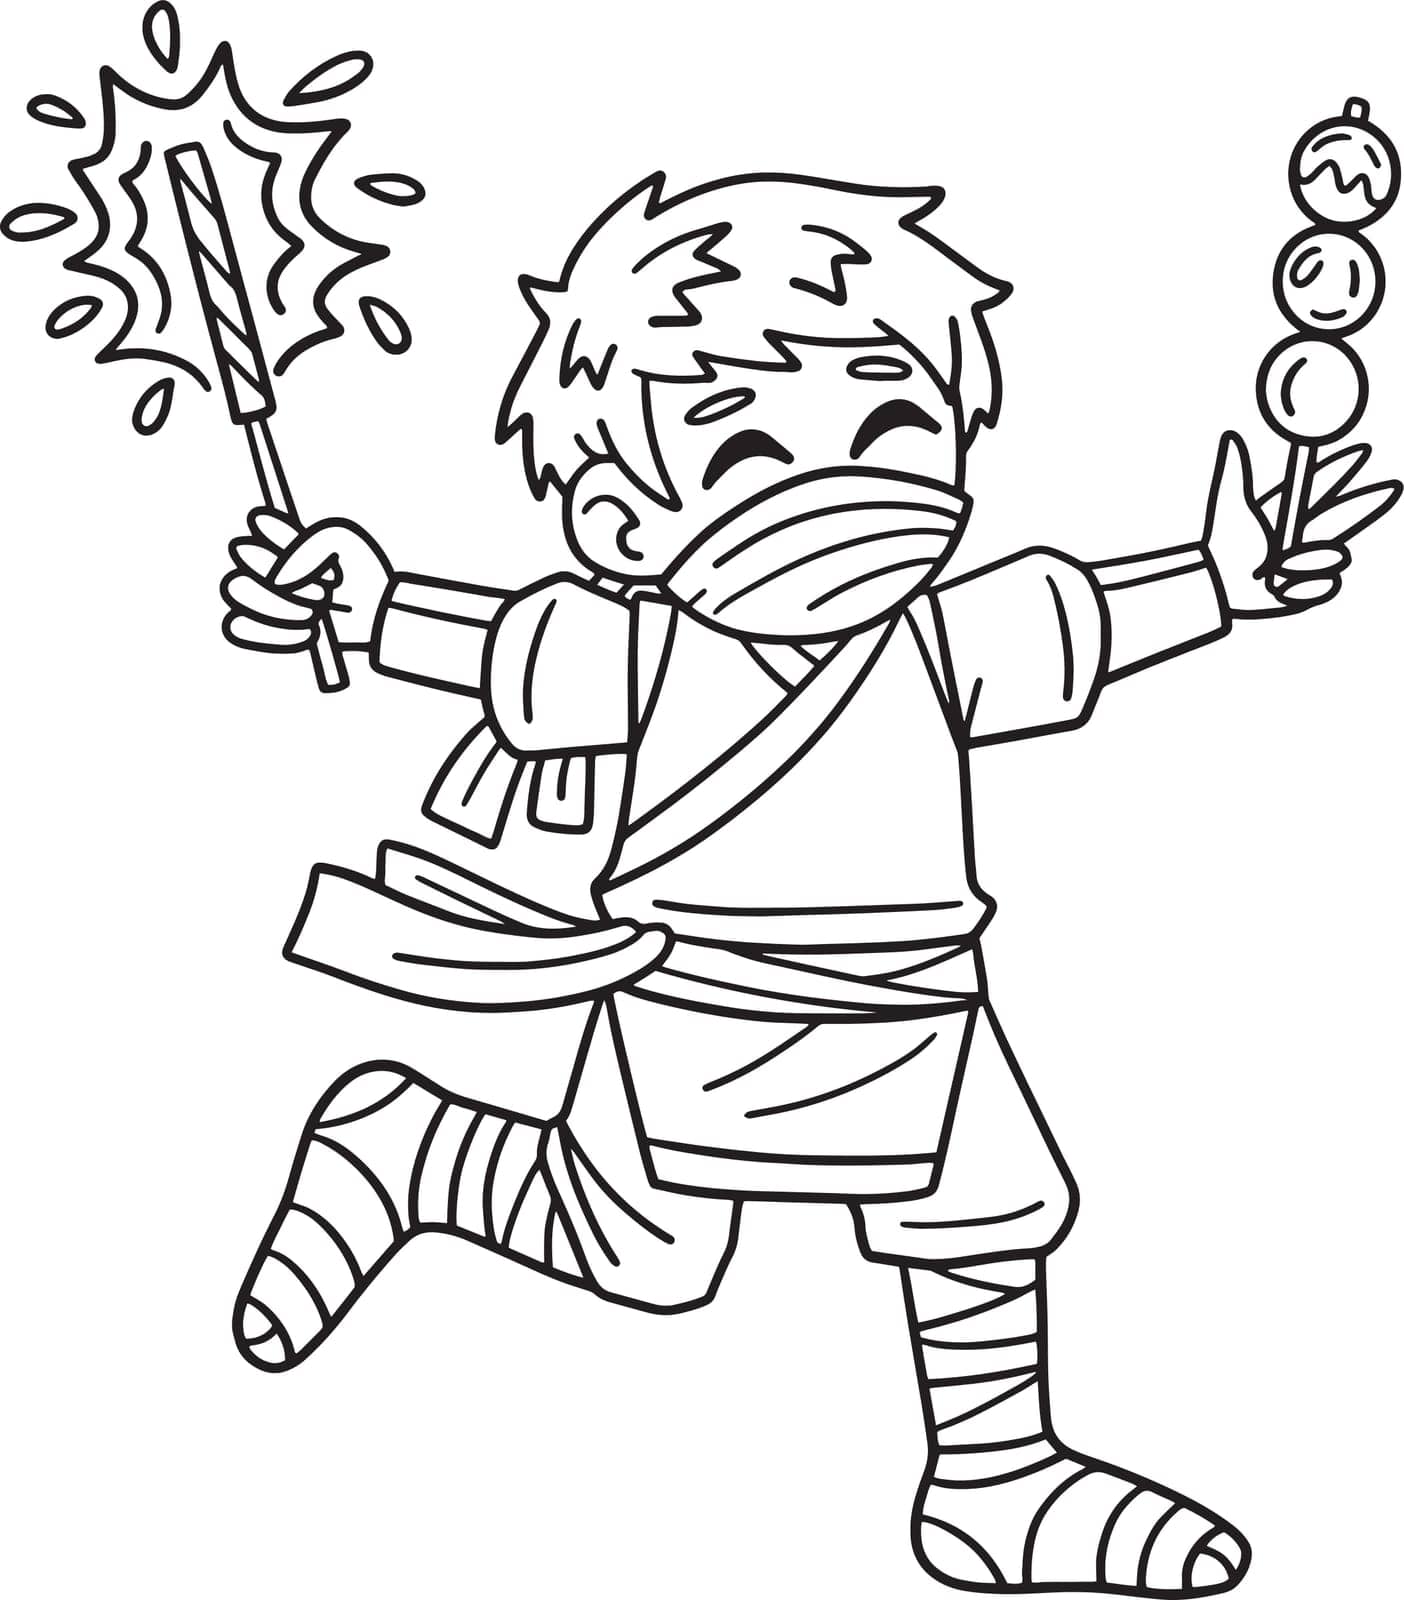 Ninja with Sparklers and Dango Isolated Coloring by abbydesign